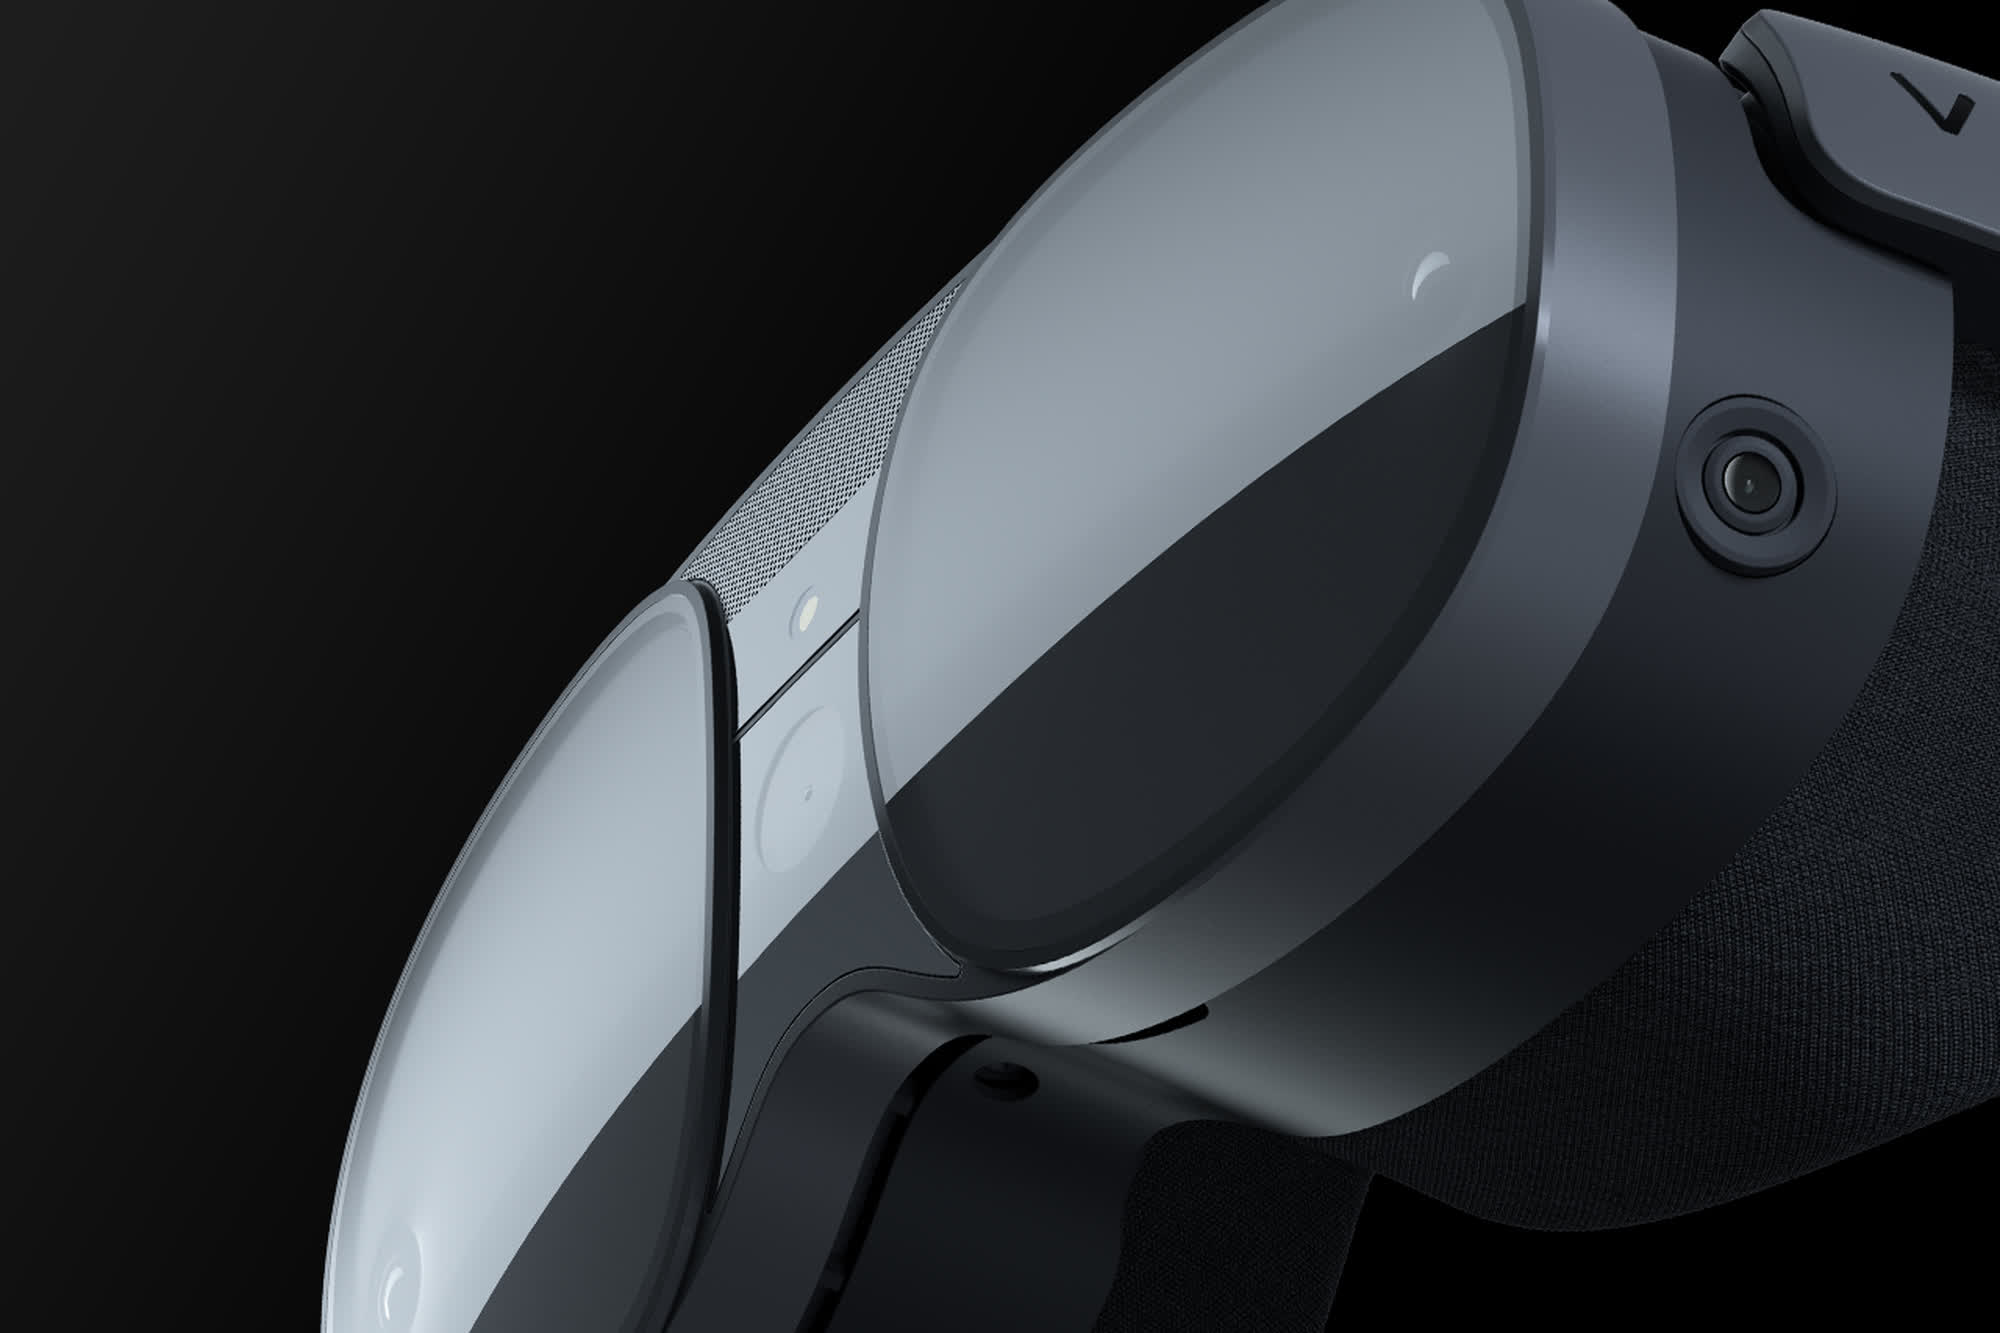 HTC is prepping a lightweight Meta Quest competitor for CES